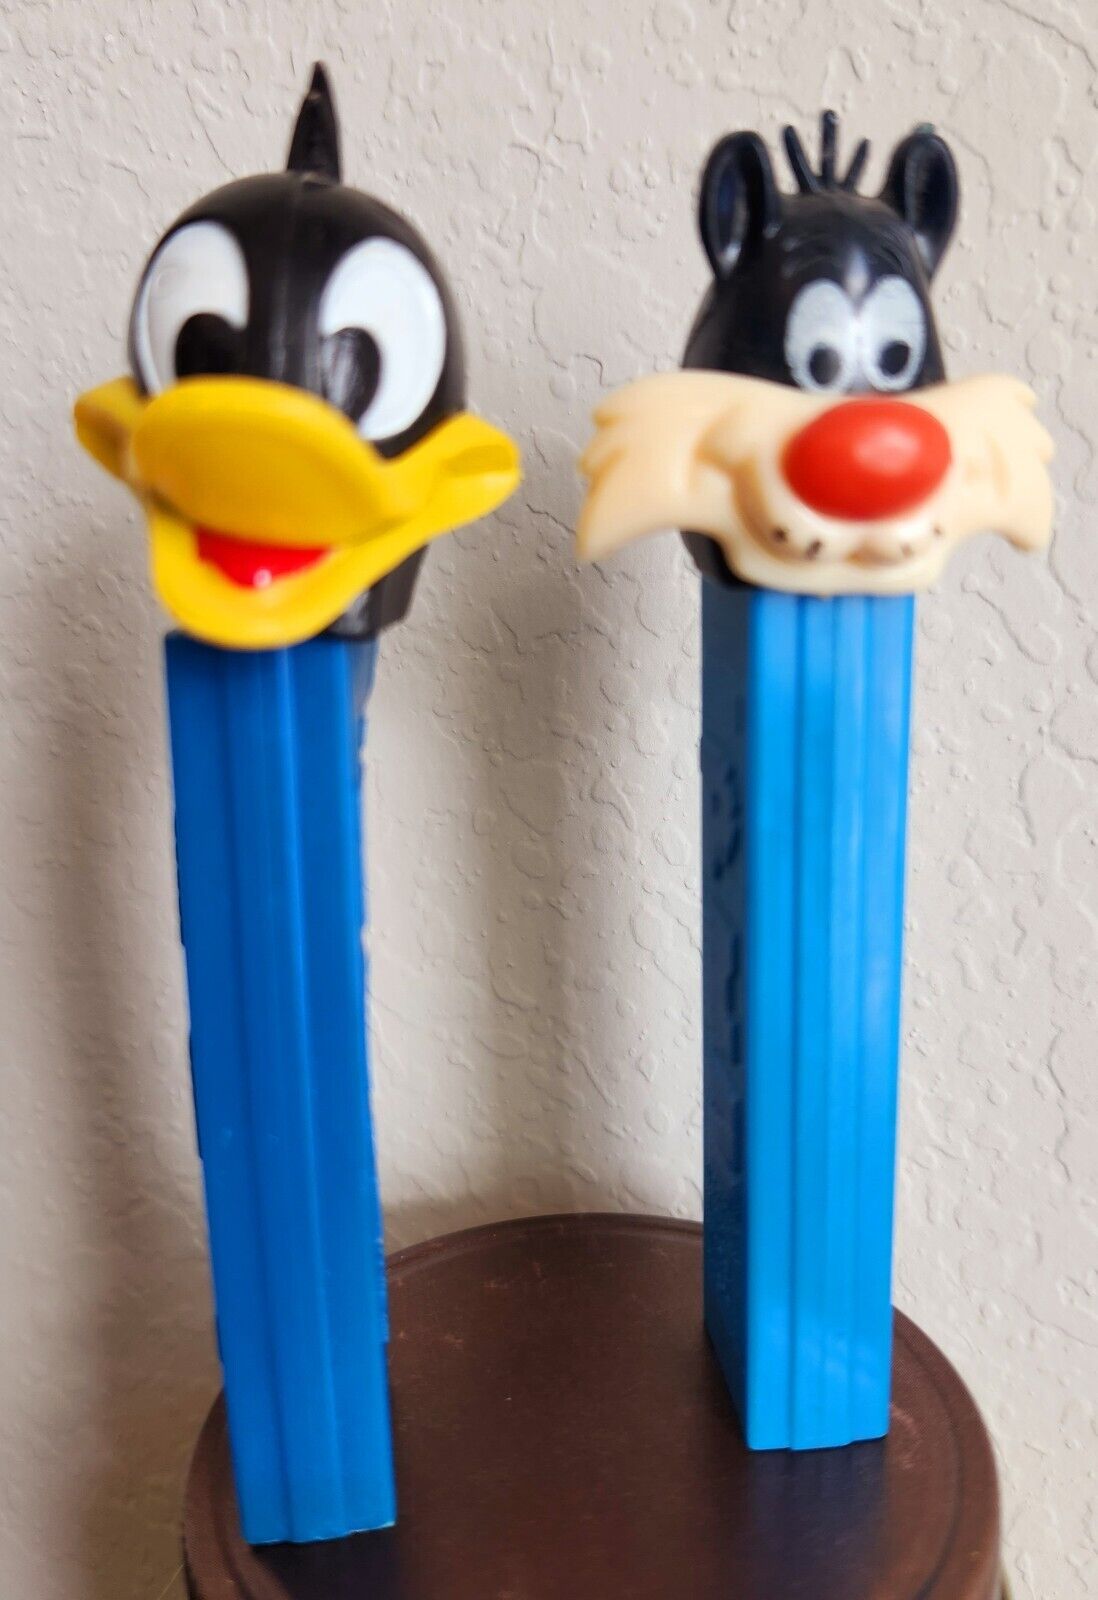 Vintage Pez No Feet. Daffy Duck And Sylvester The Cat. Great Loony Toons Friends